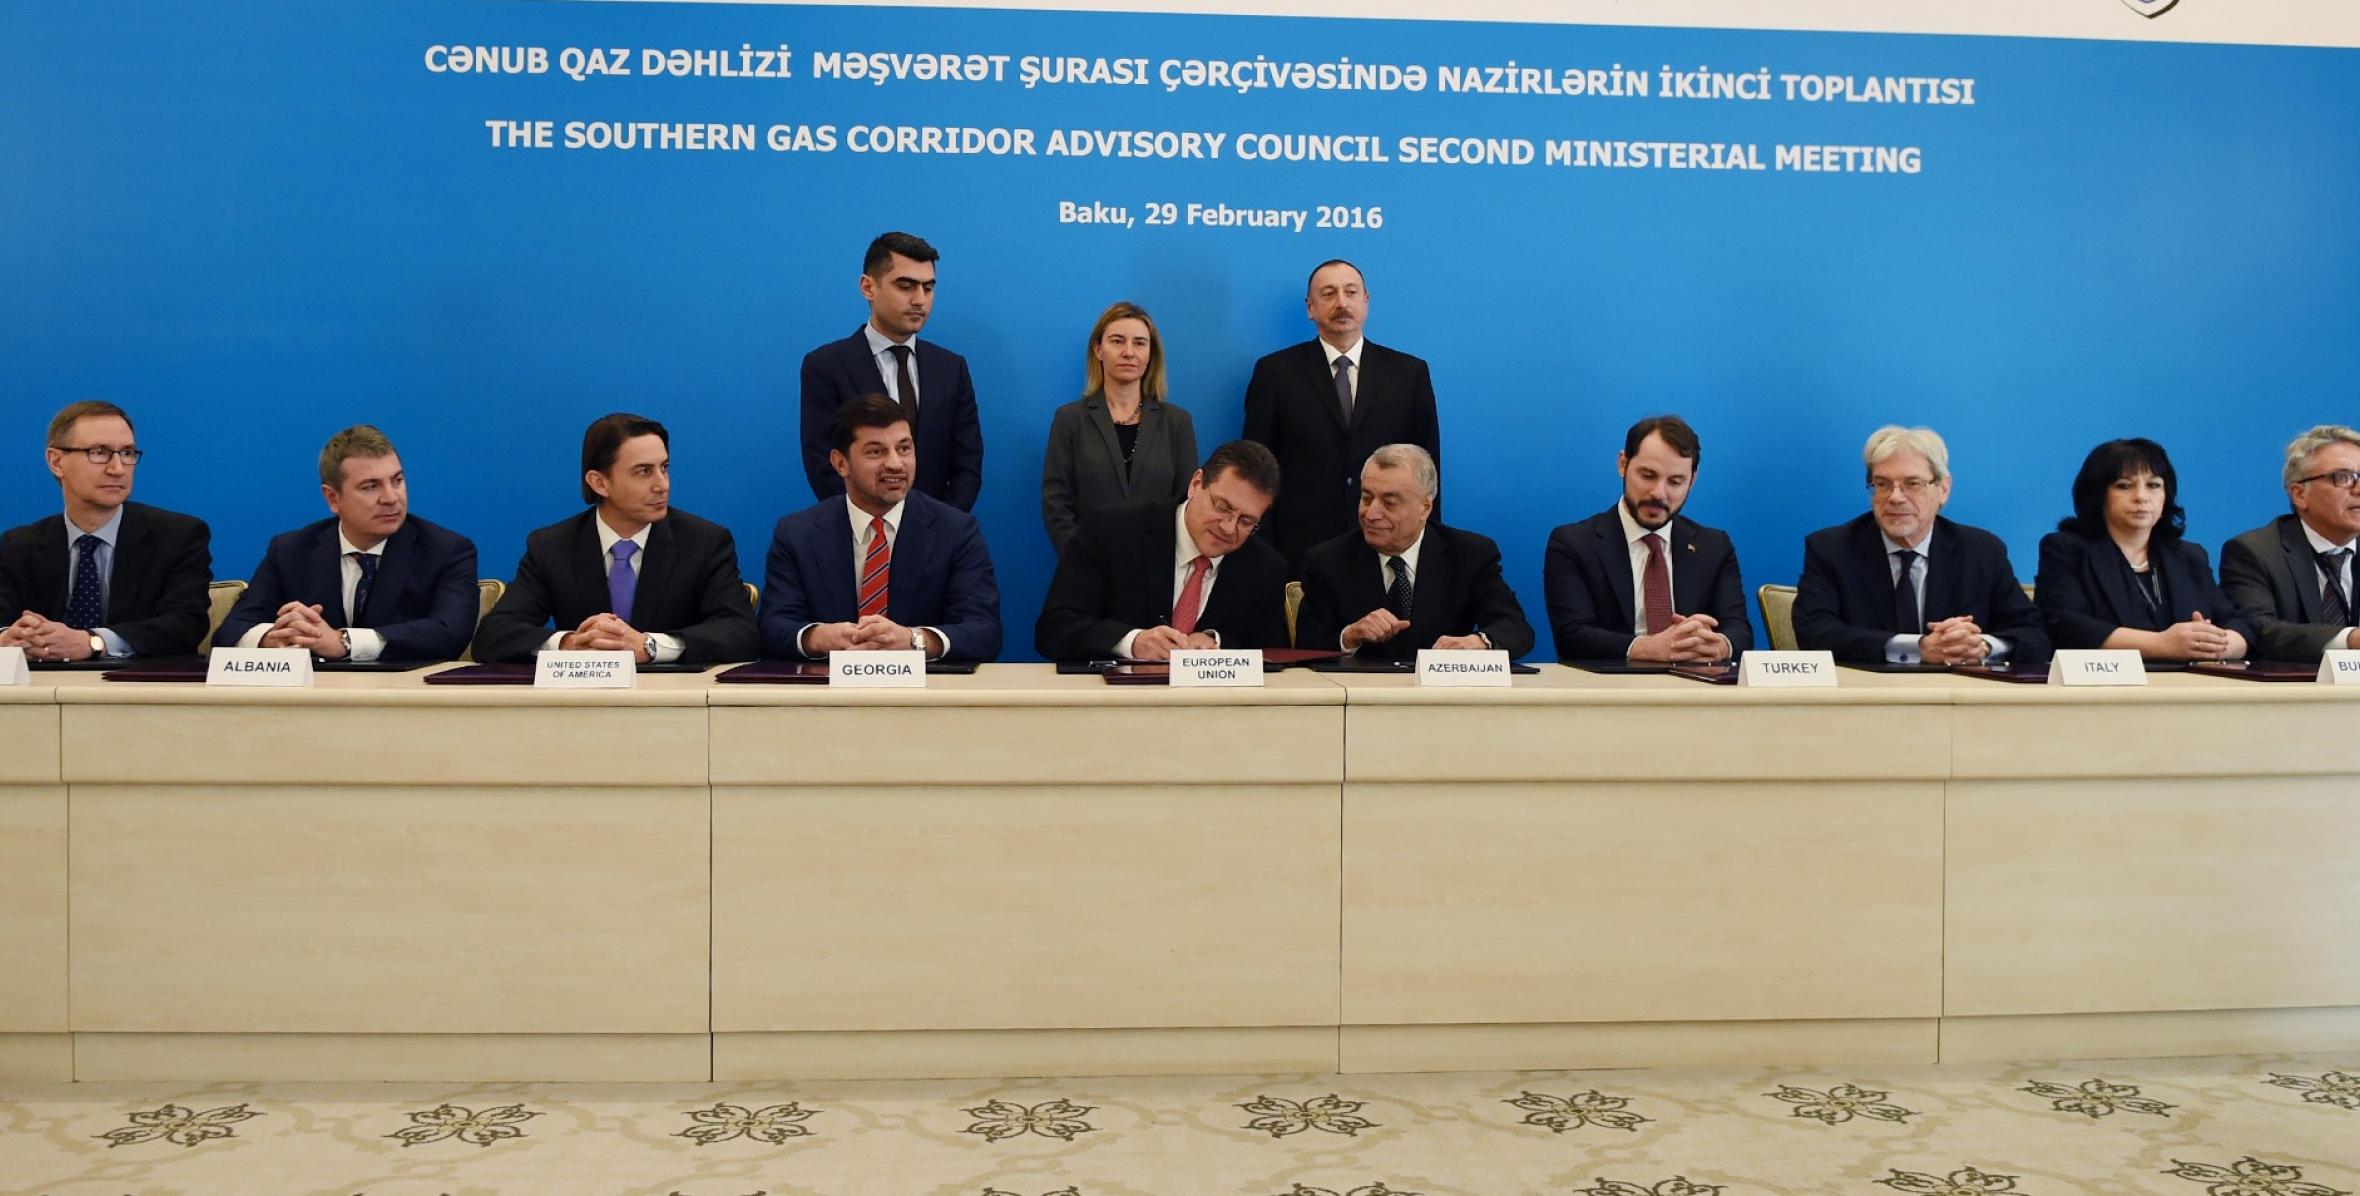 Joint Declaration of the second Ministerial Meeting of Southern Gas Corridor Advisory Council signed